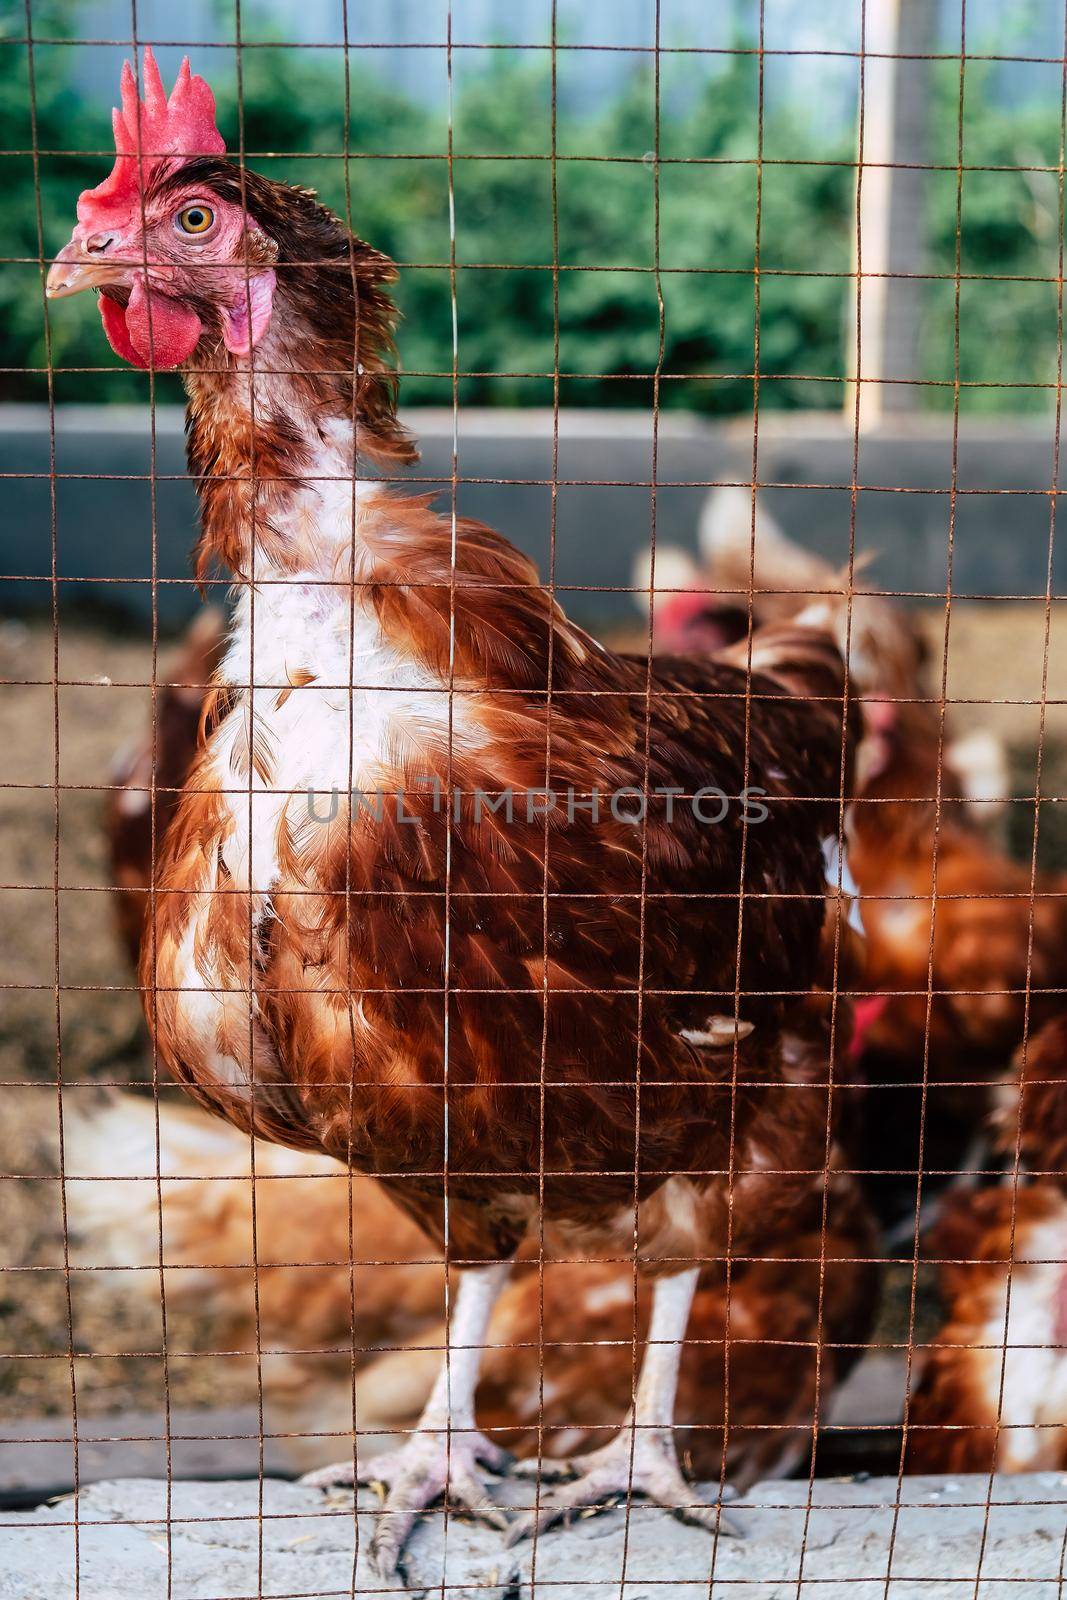 Image of Chickens on traditional free range poultry farm in thailand